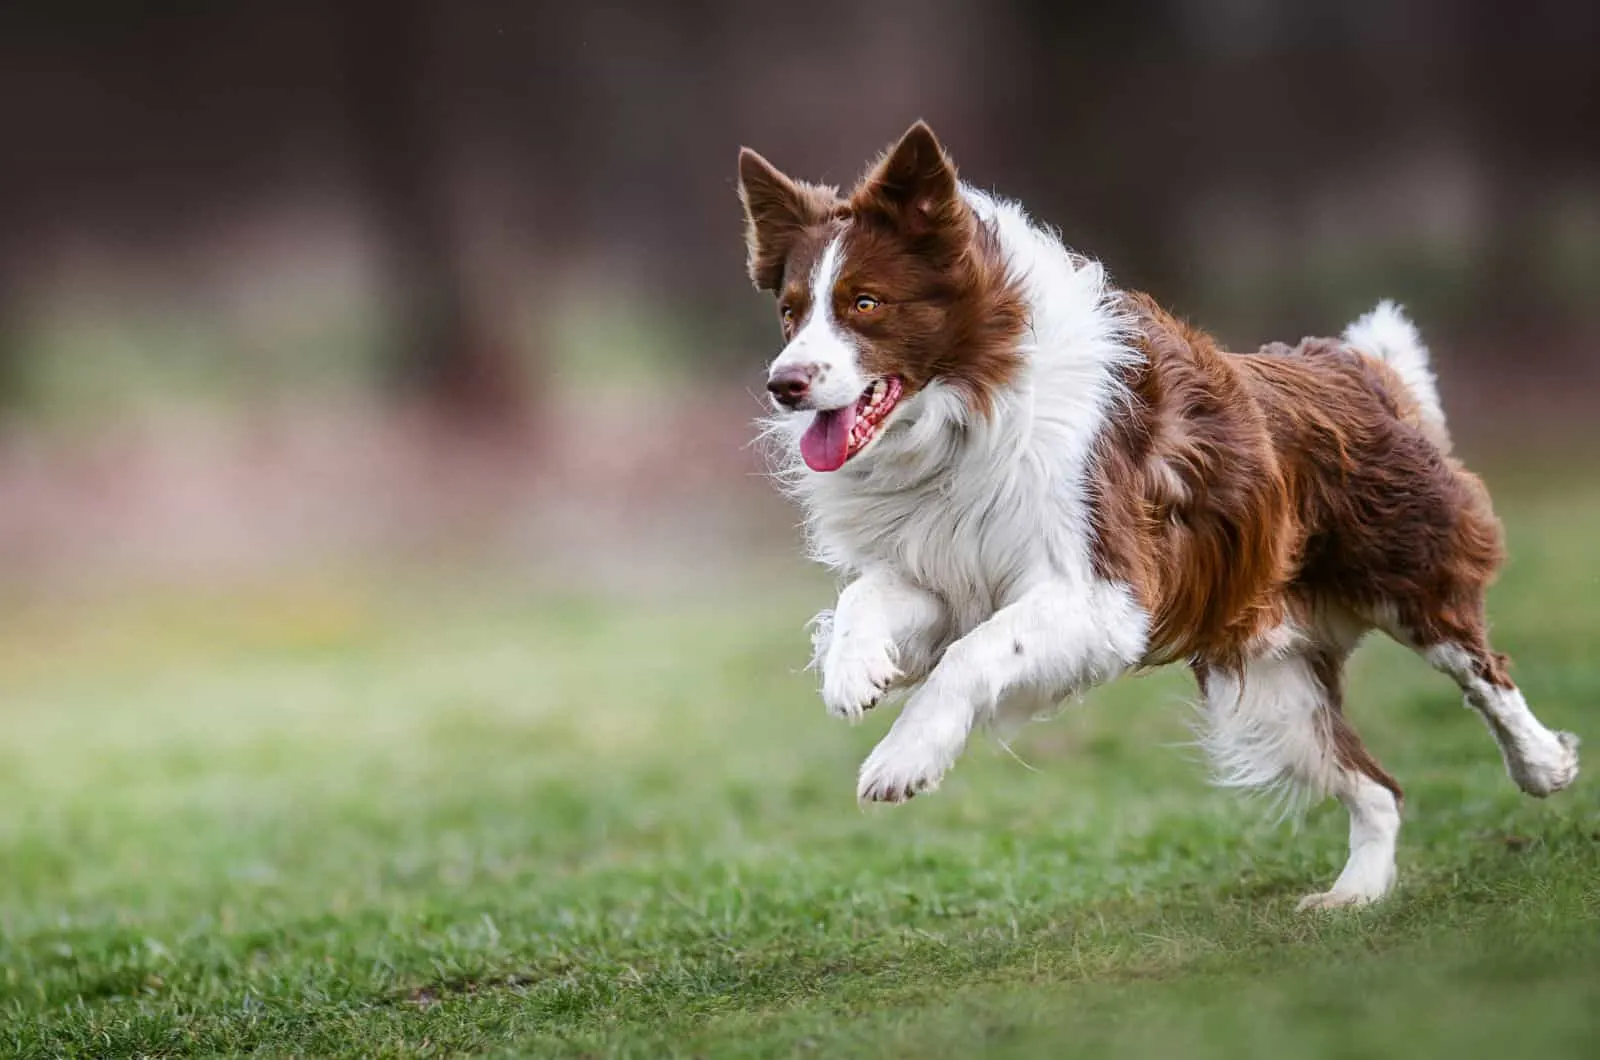 The Red Border Collie